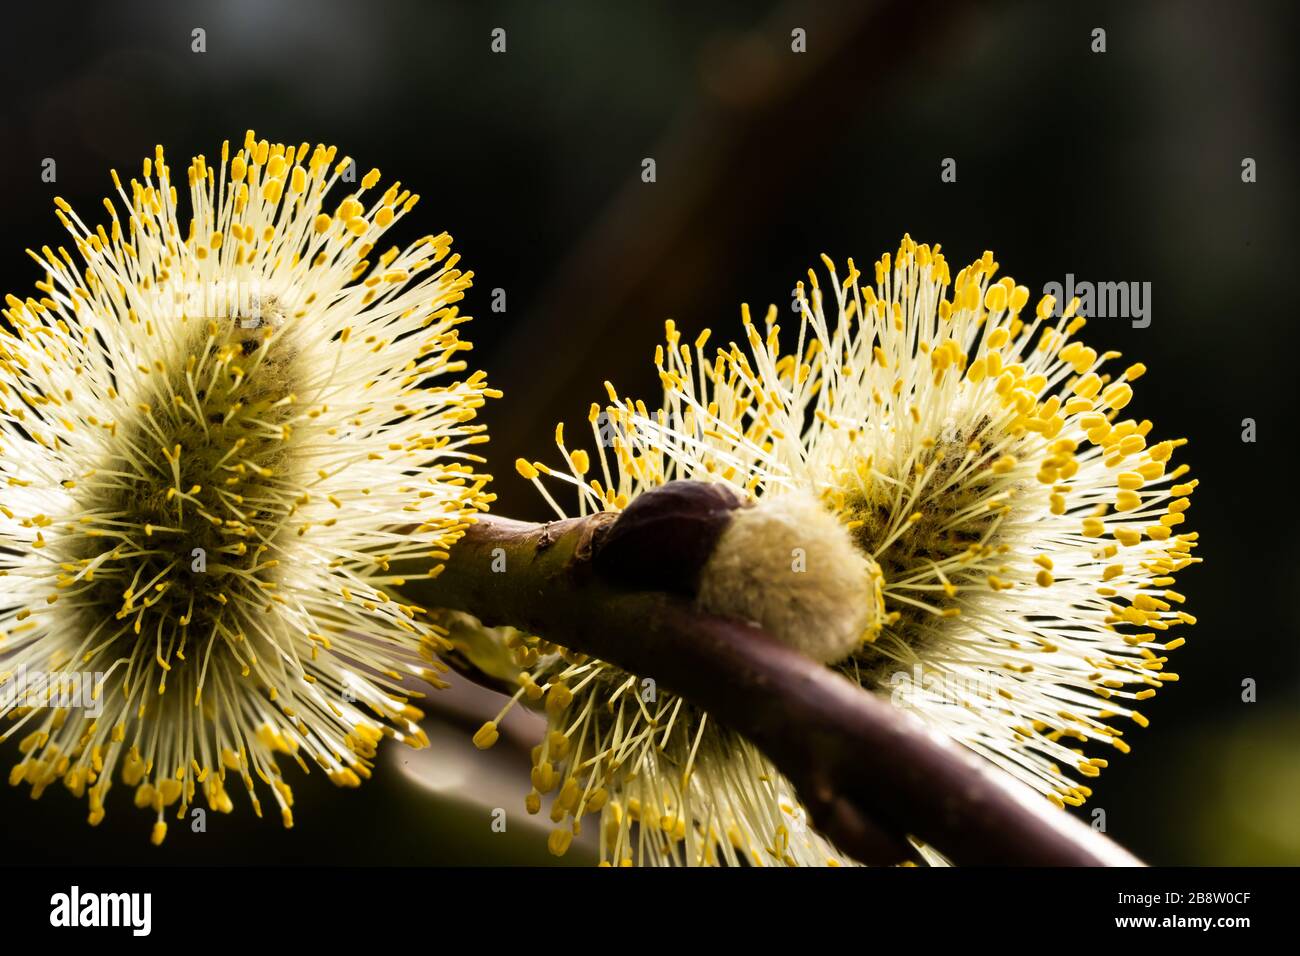 Weeping willow catkin blossom. Salix in yellow flower Stock Photo